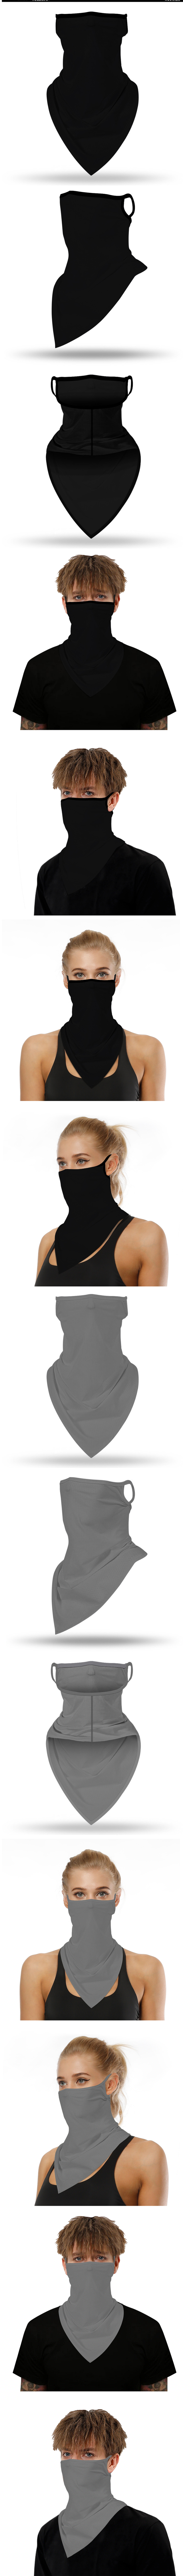 Polyester-Breathable-Face-Cover-Headscarf-Windproof-Dustproof-Neck-Gaiter-UV-Protection-Motorcycling-1677694-1